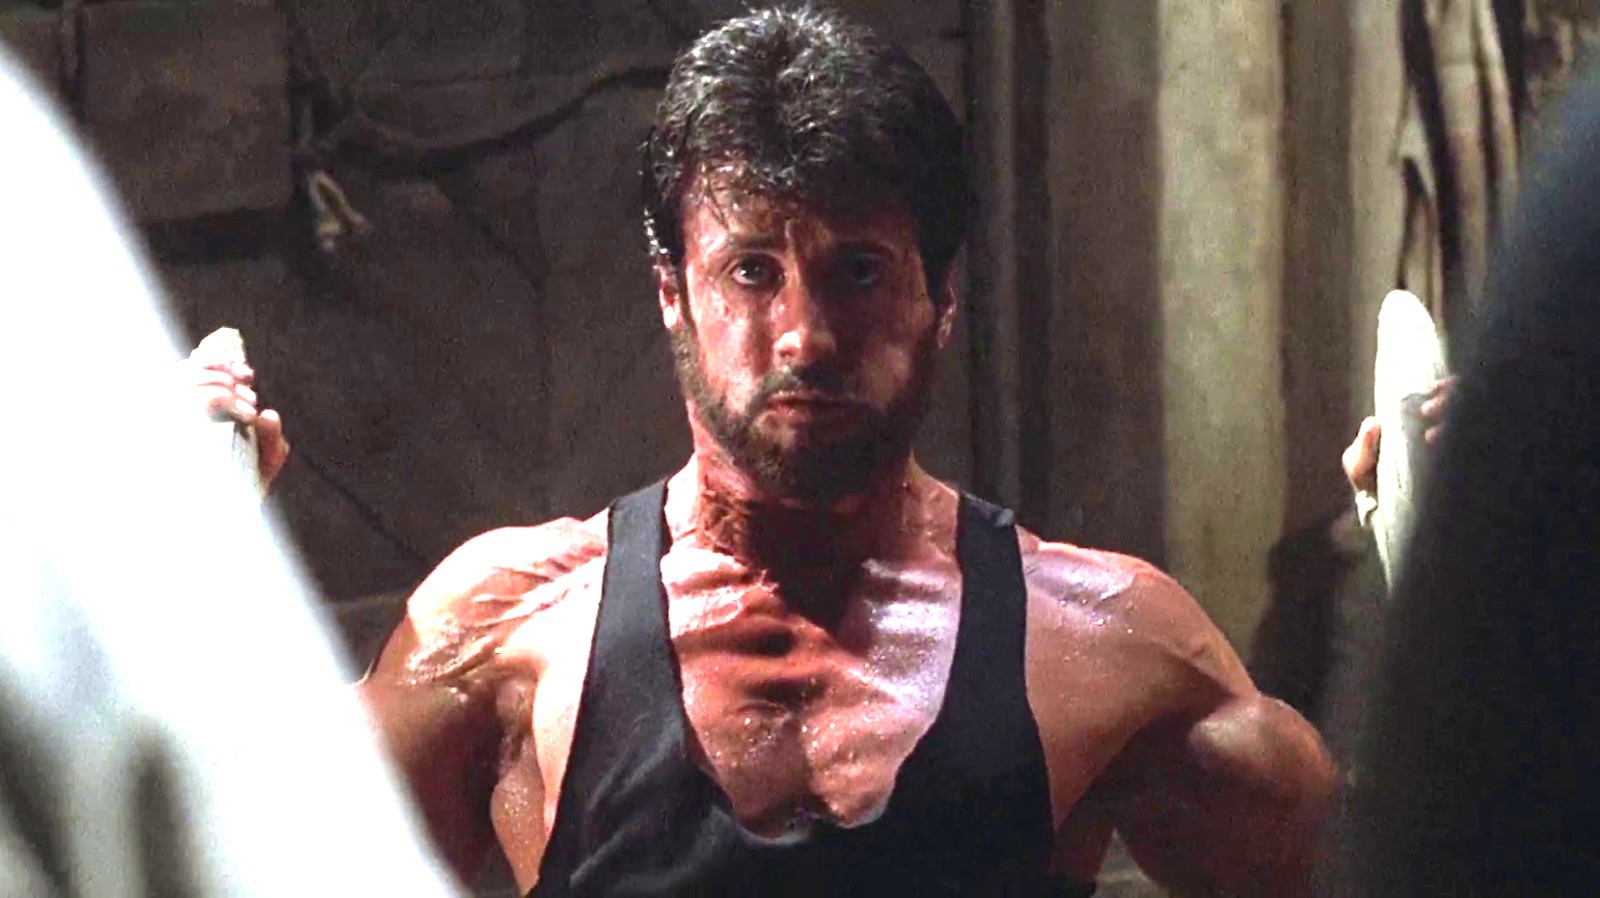 https://www.slashfilm.com/img/gallery/sylvester-stallone-used-rocky-ivs-training-montage-to-honor-the-film-that-made-him-an-actor/l-intro-1678140233.jpg